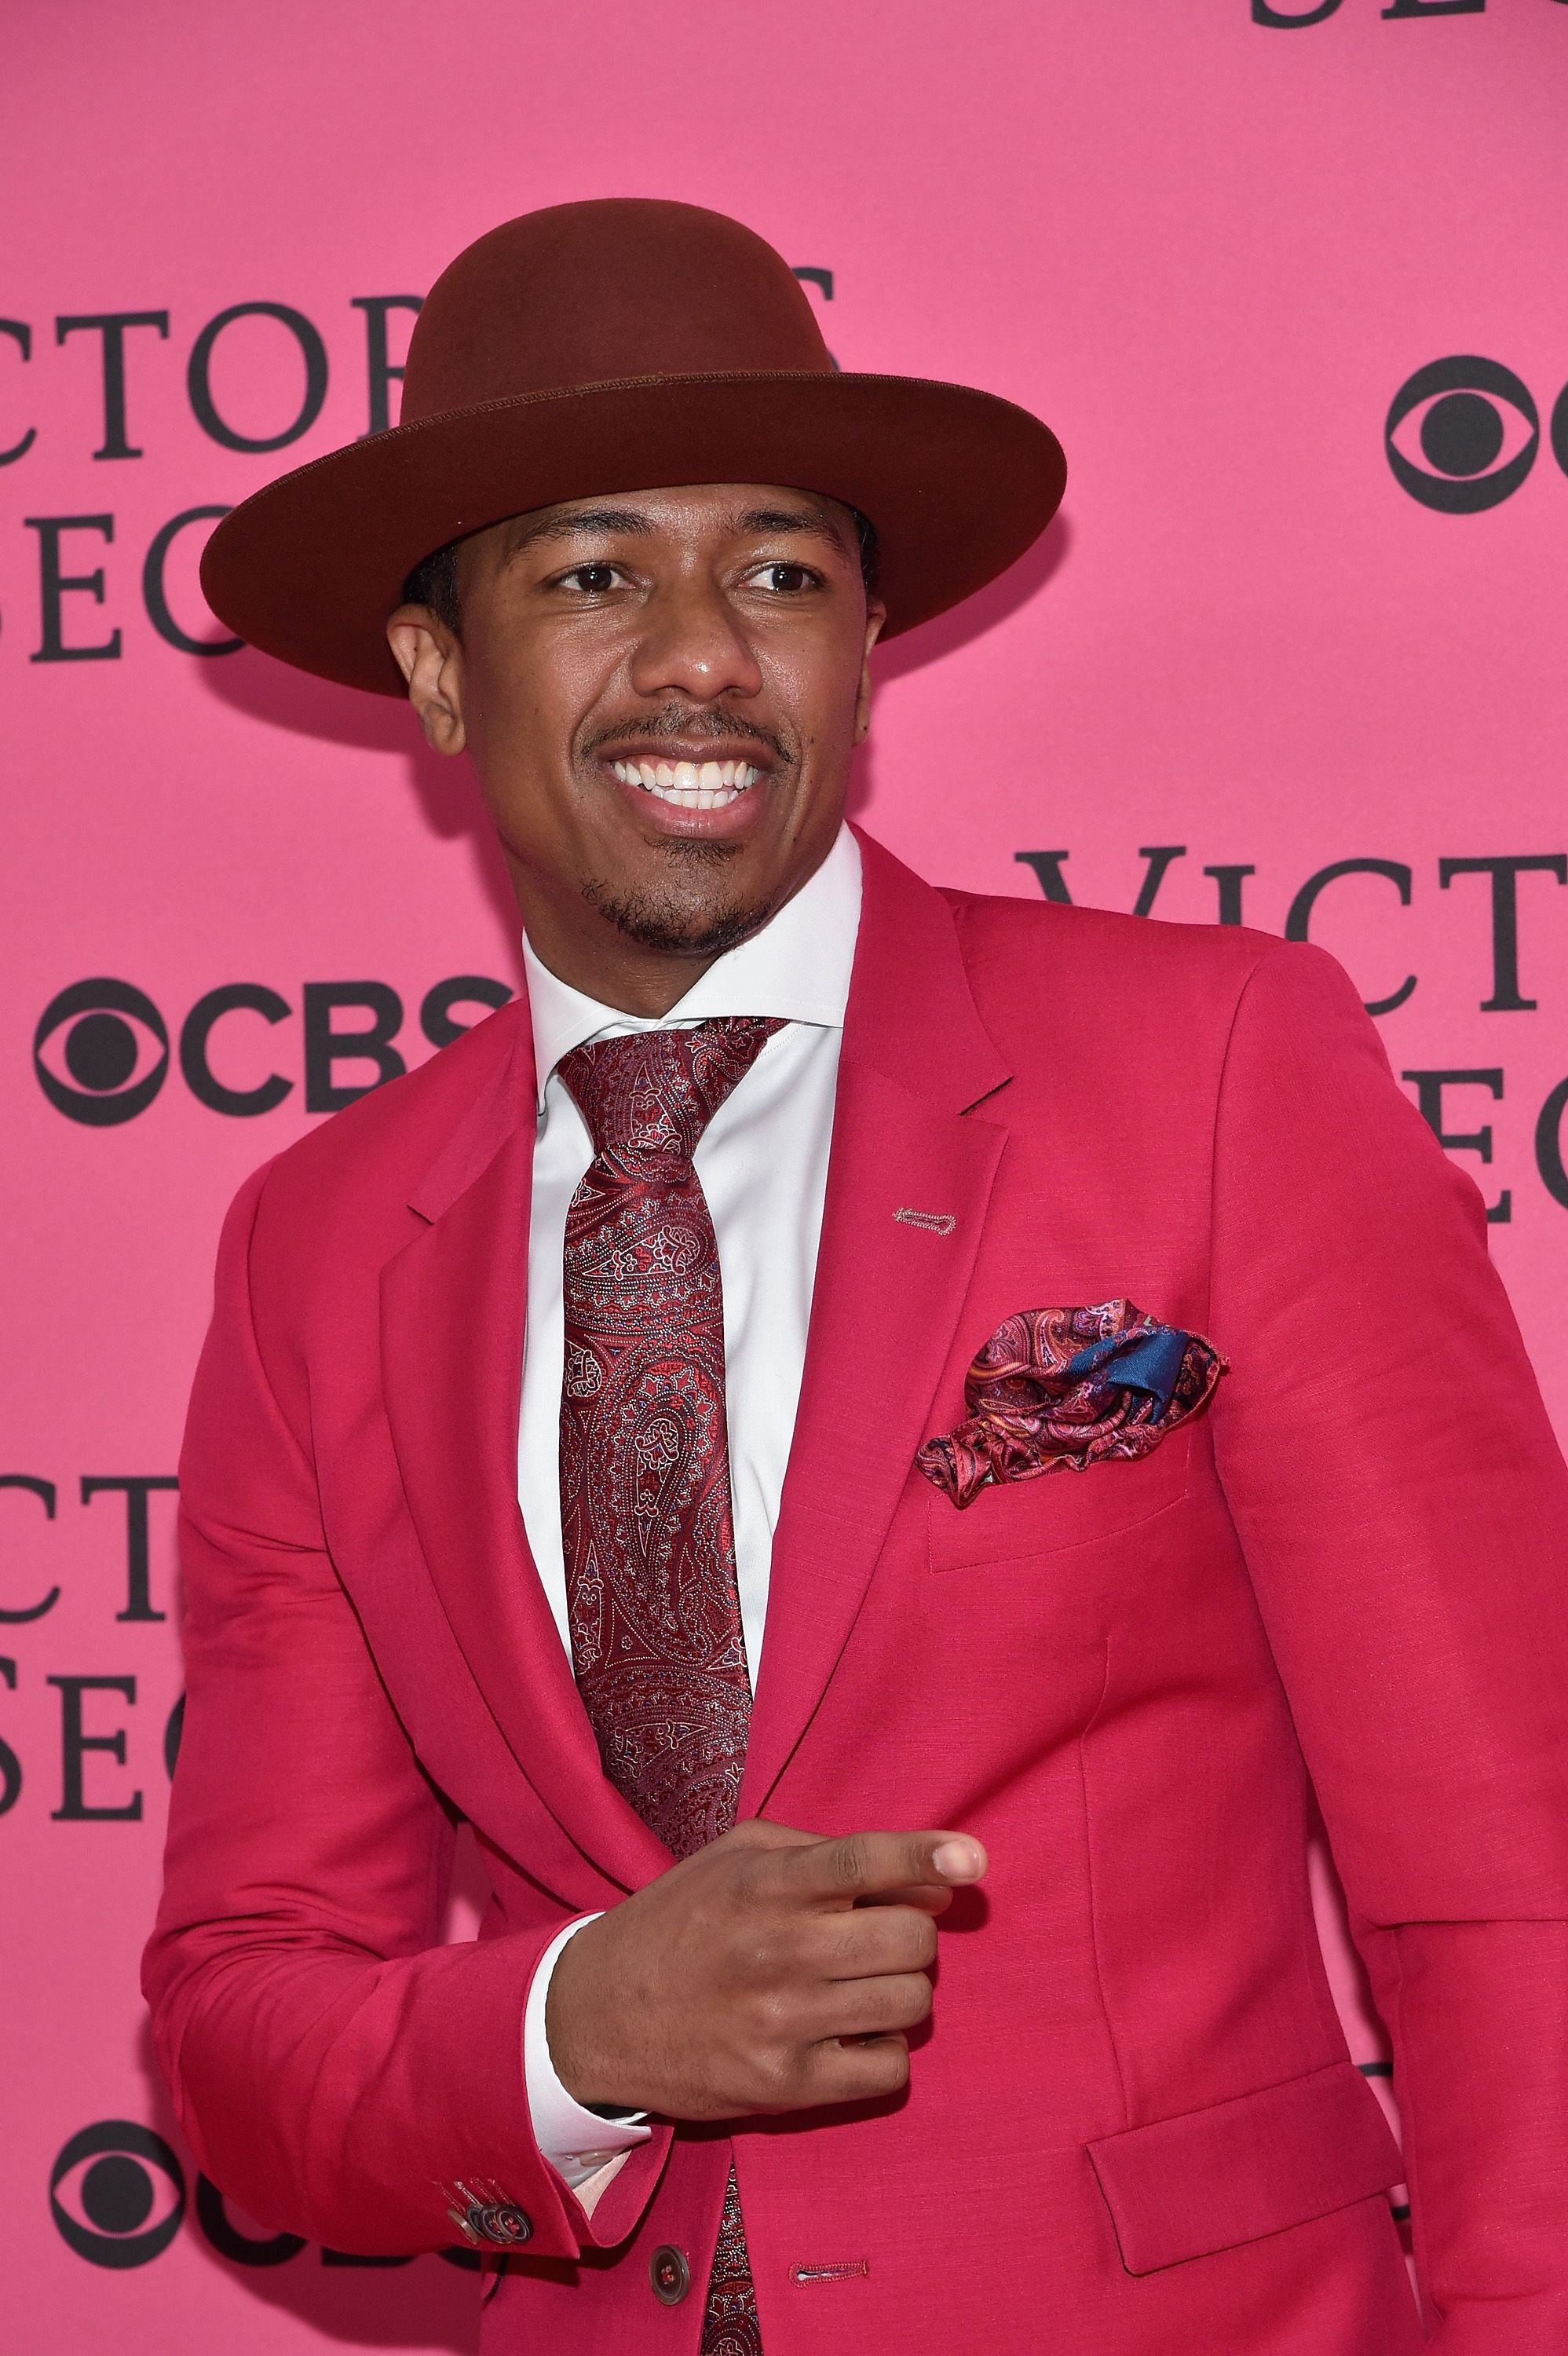 Nick Cannon during the 2015 Victoria's Secret Fashion Show at Lexington Avenue Armory on November 10, 2015 in New York City. | Source: Getty Images